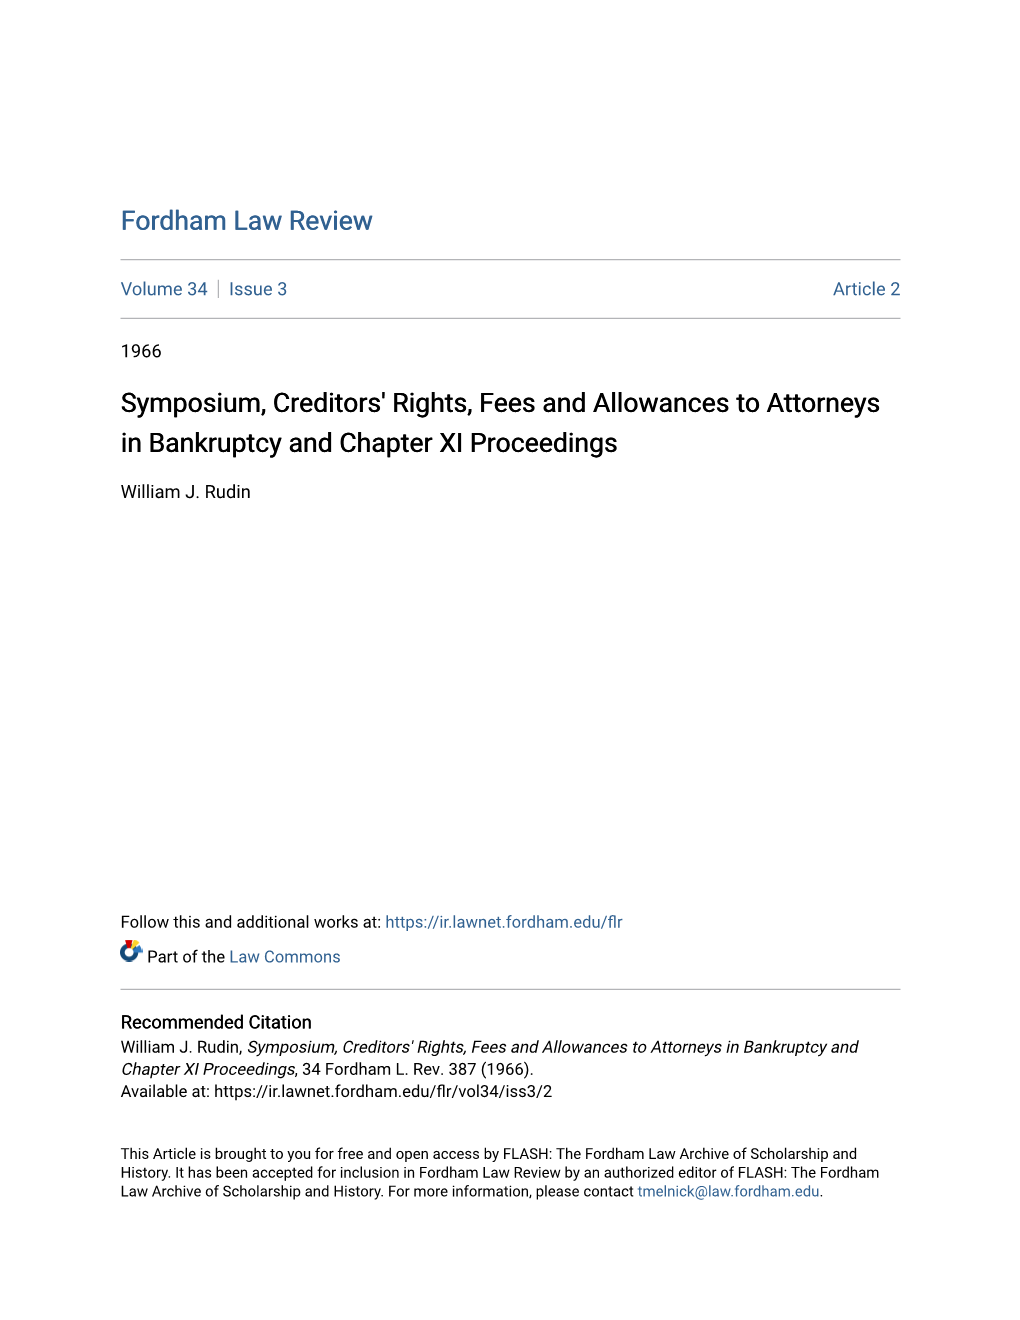 Symposium, Creditors' Rights, Fees and Allowances to Attorneys in Bankruptcy and Chapter XI Proceedings